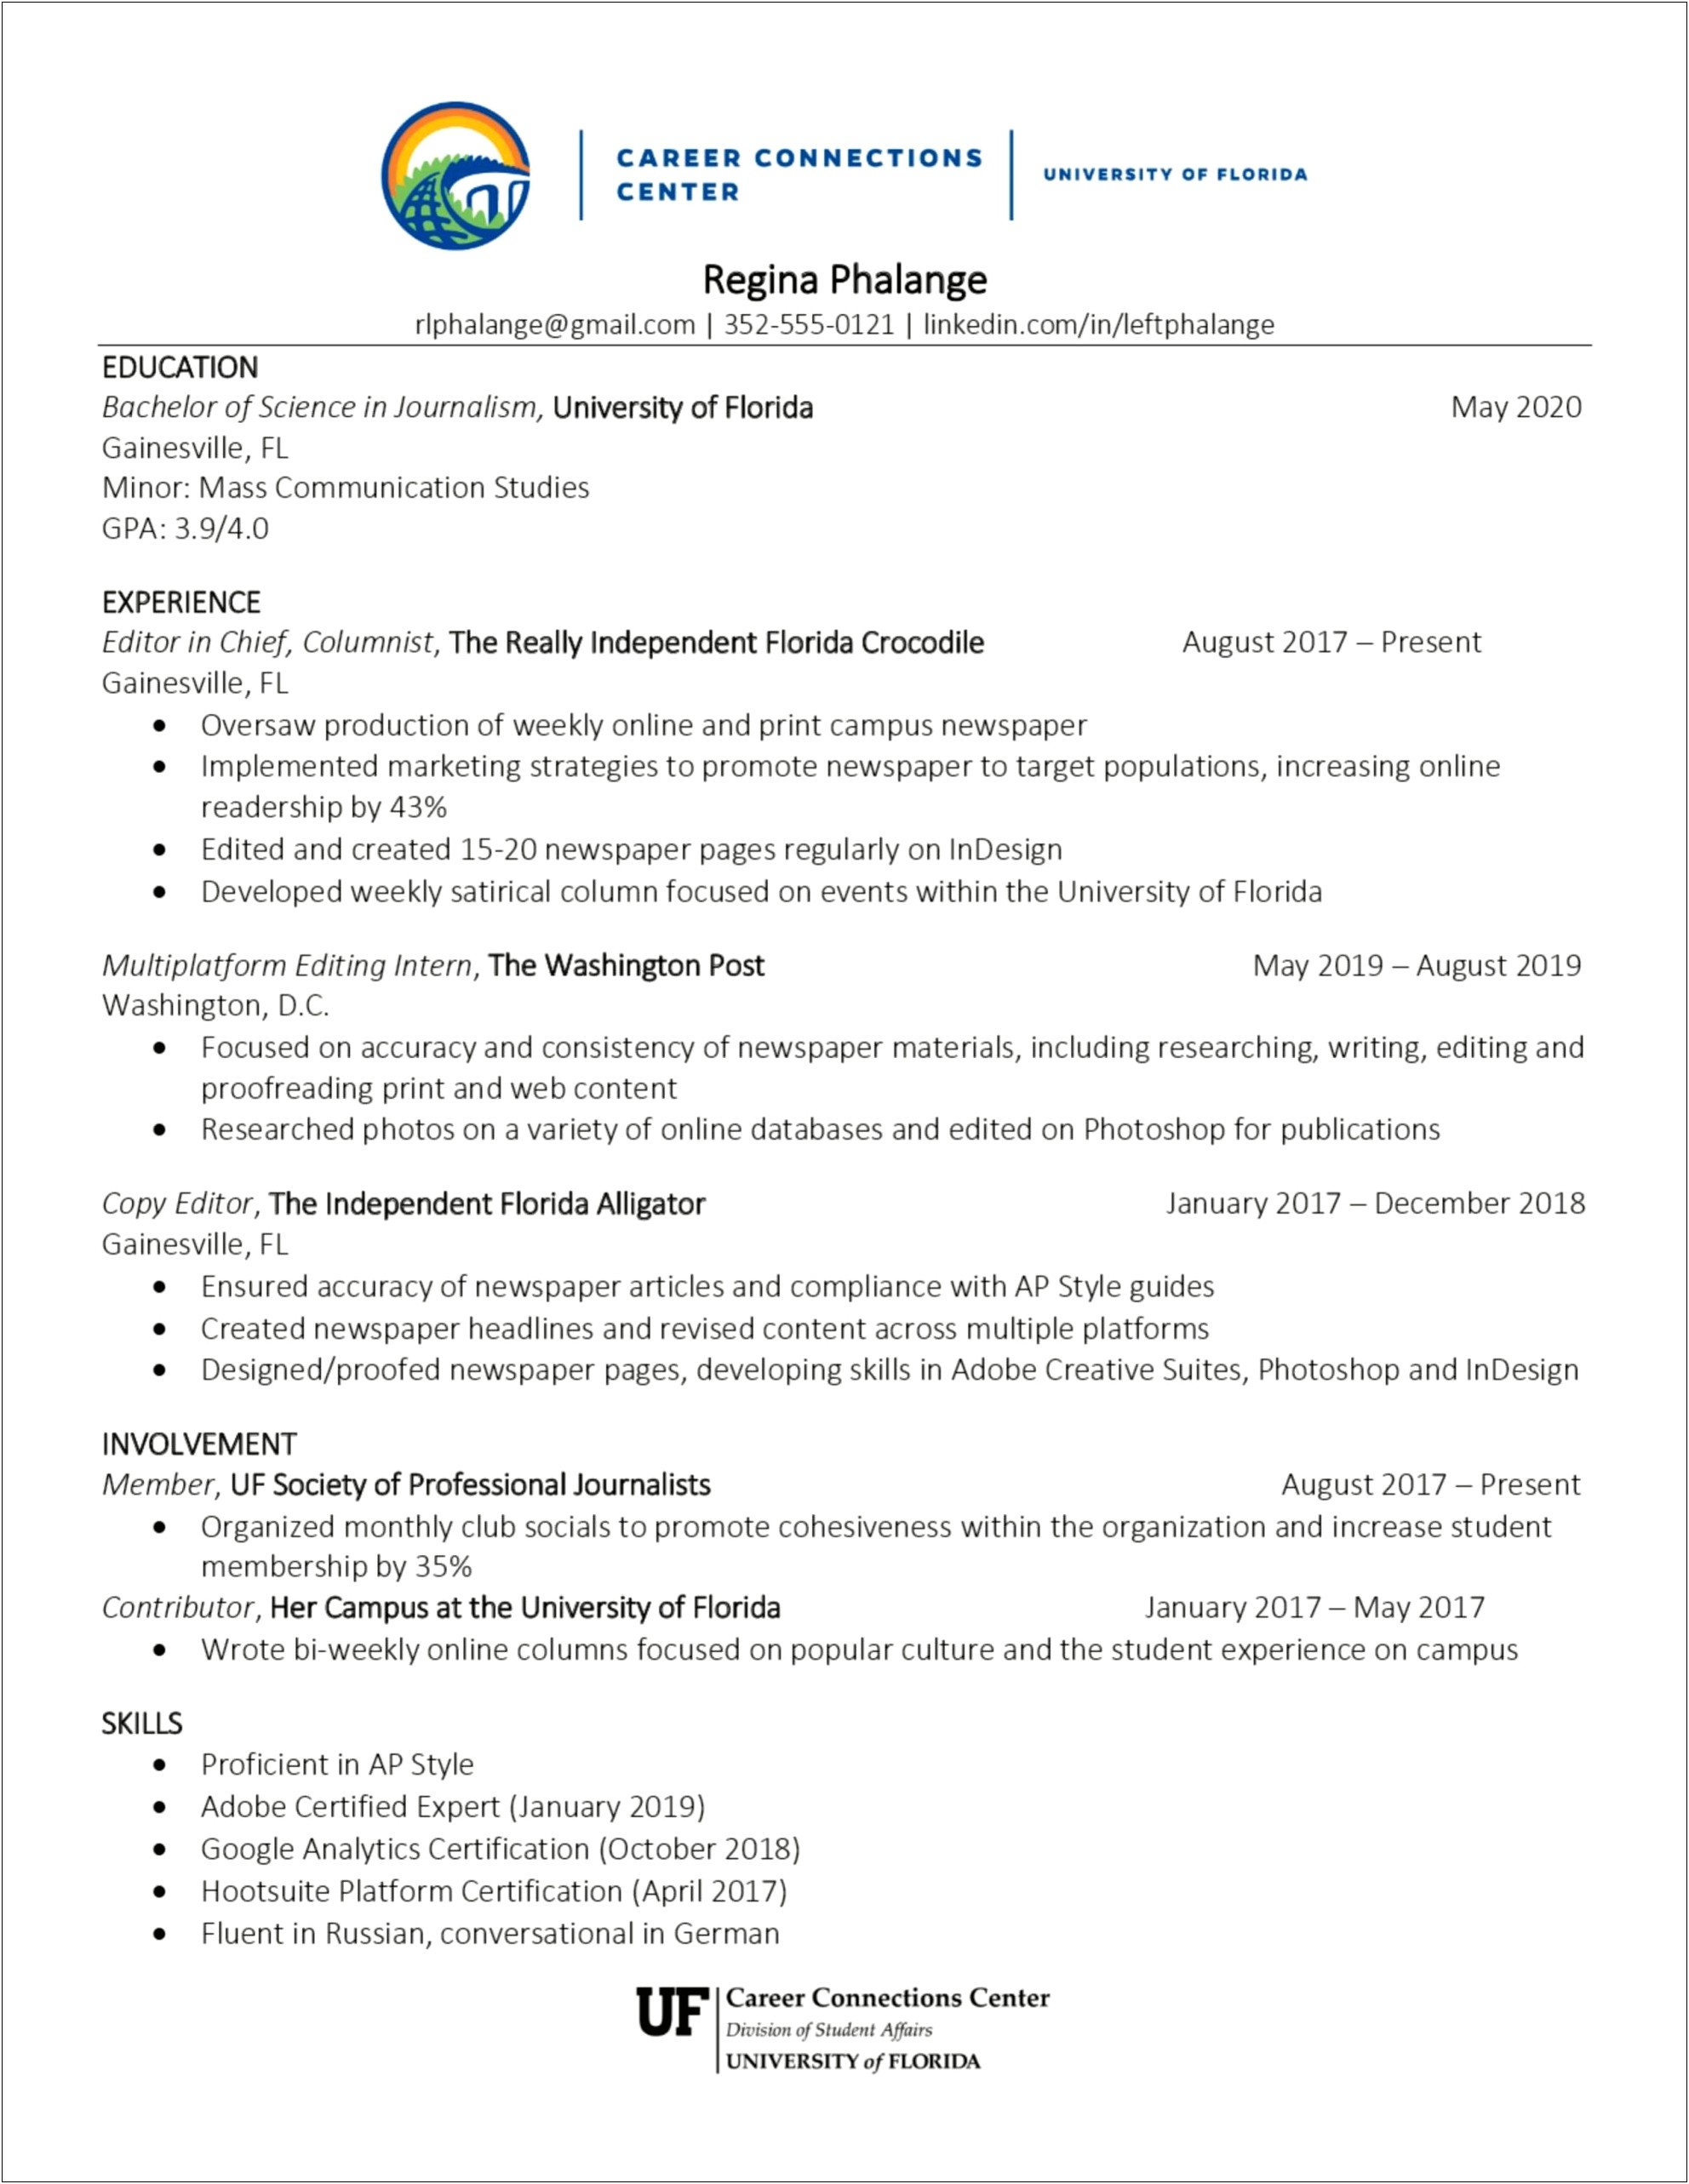 Where Should I Put Certifications On Resume